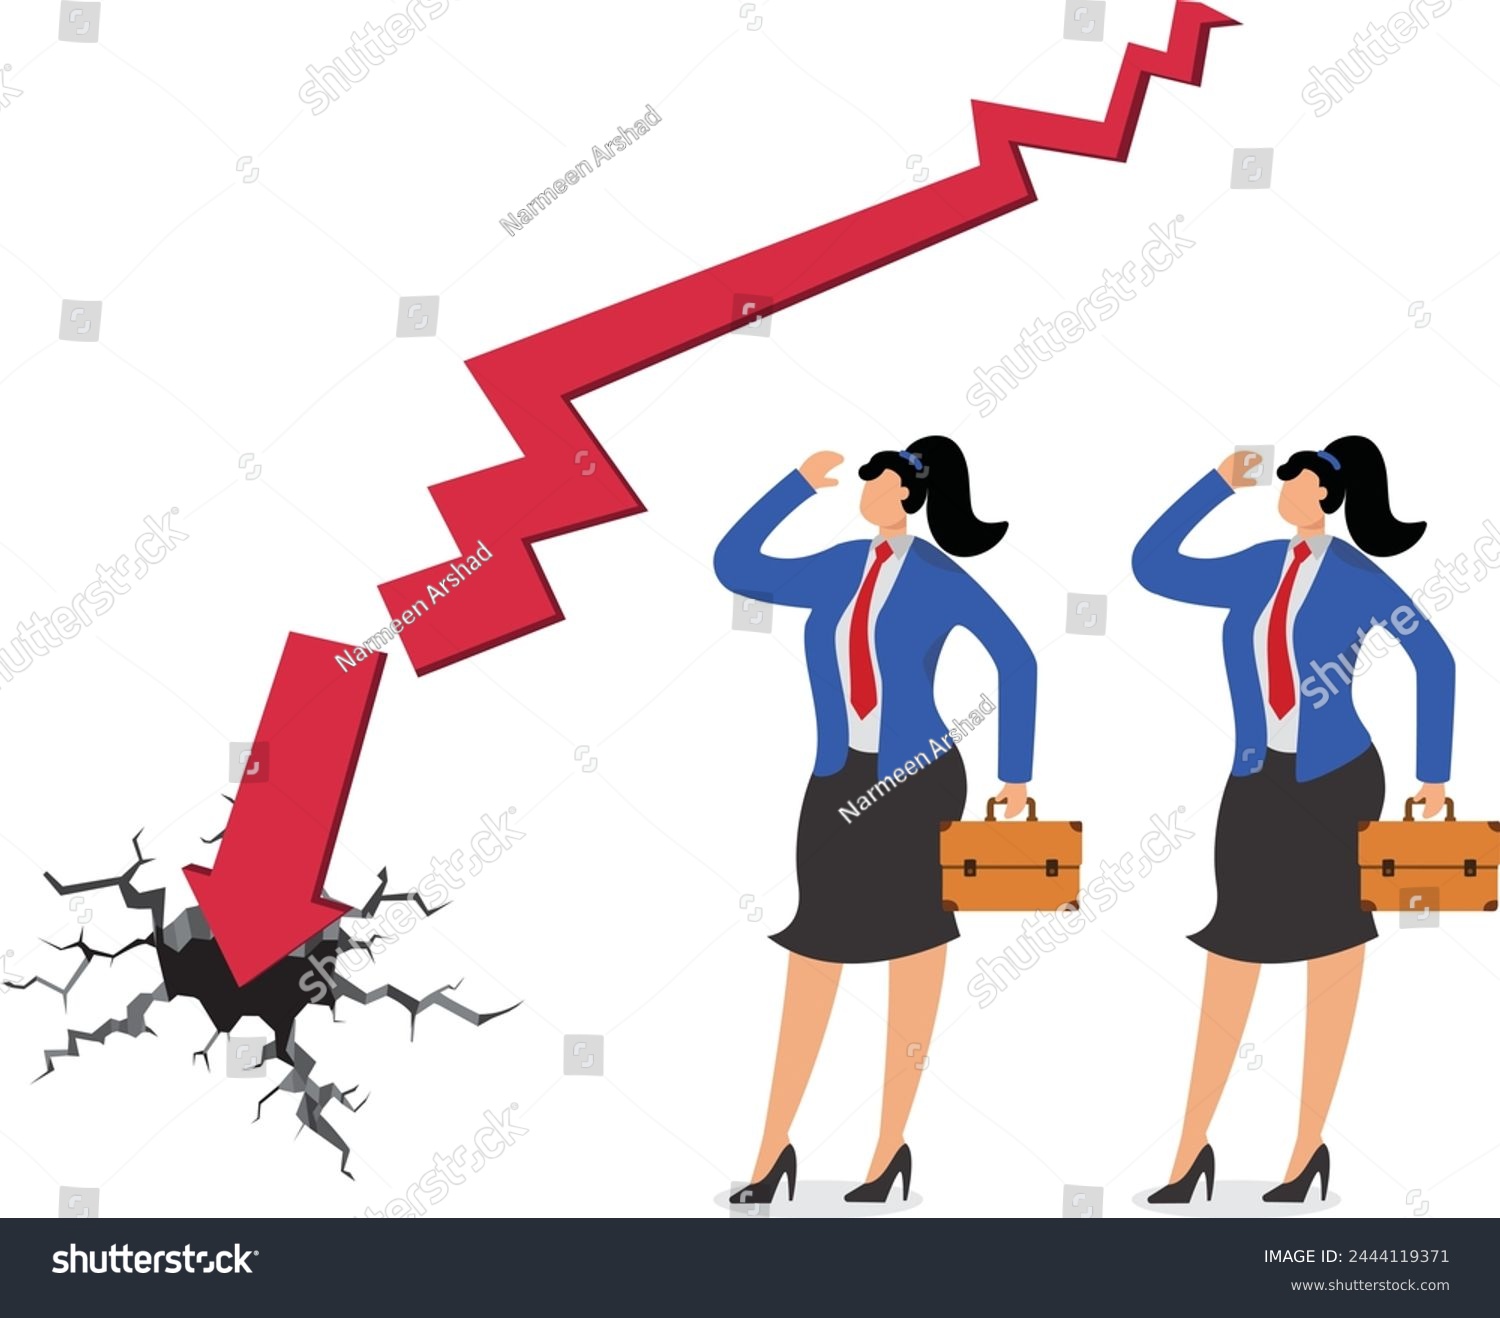 SVG of Broken negotiations, termination of a partnership or agreement, bad cooperation or poor business relations, two businesswomen standing on either side of a broken arrow svg